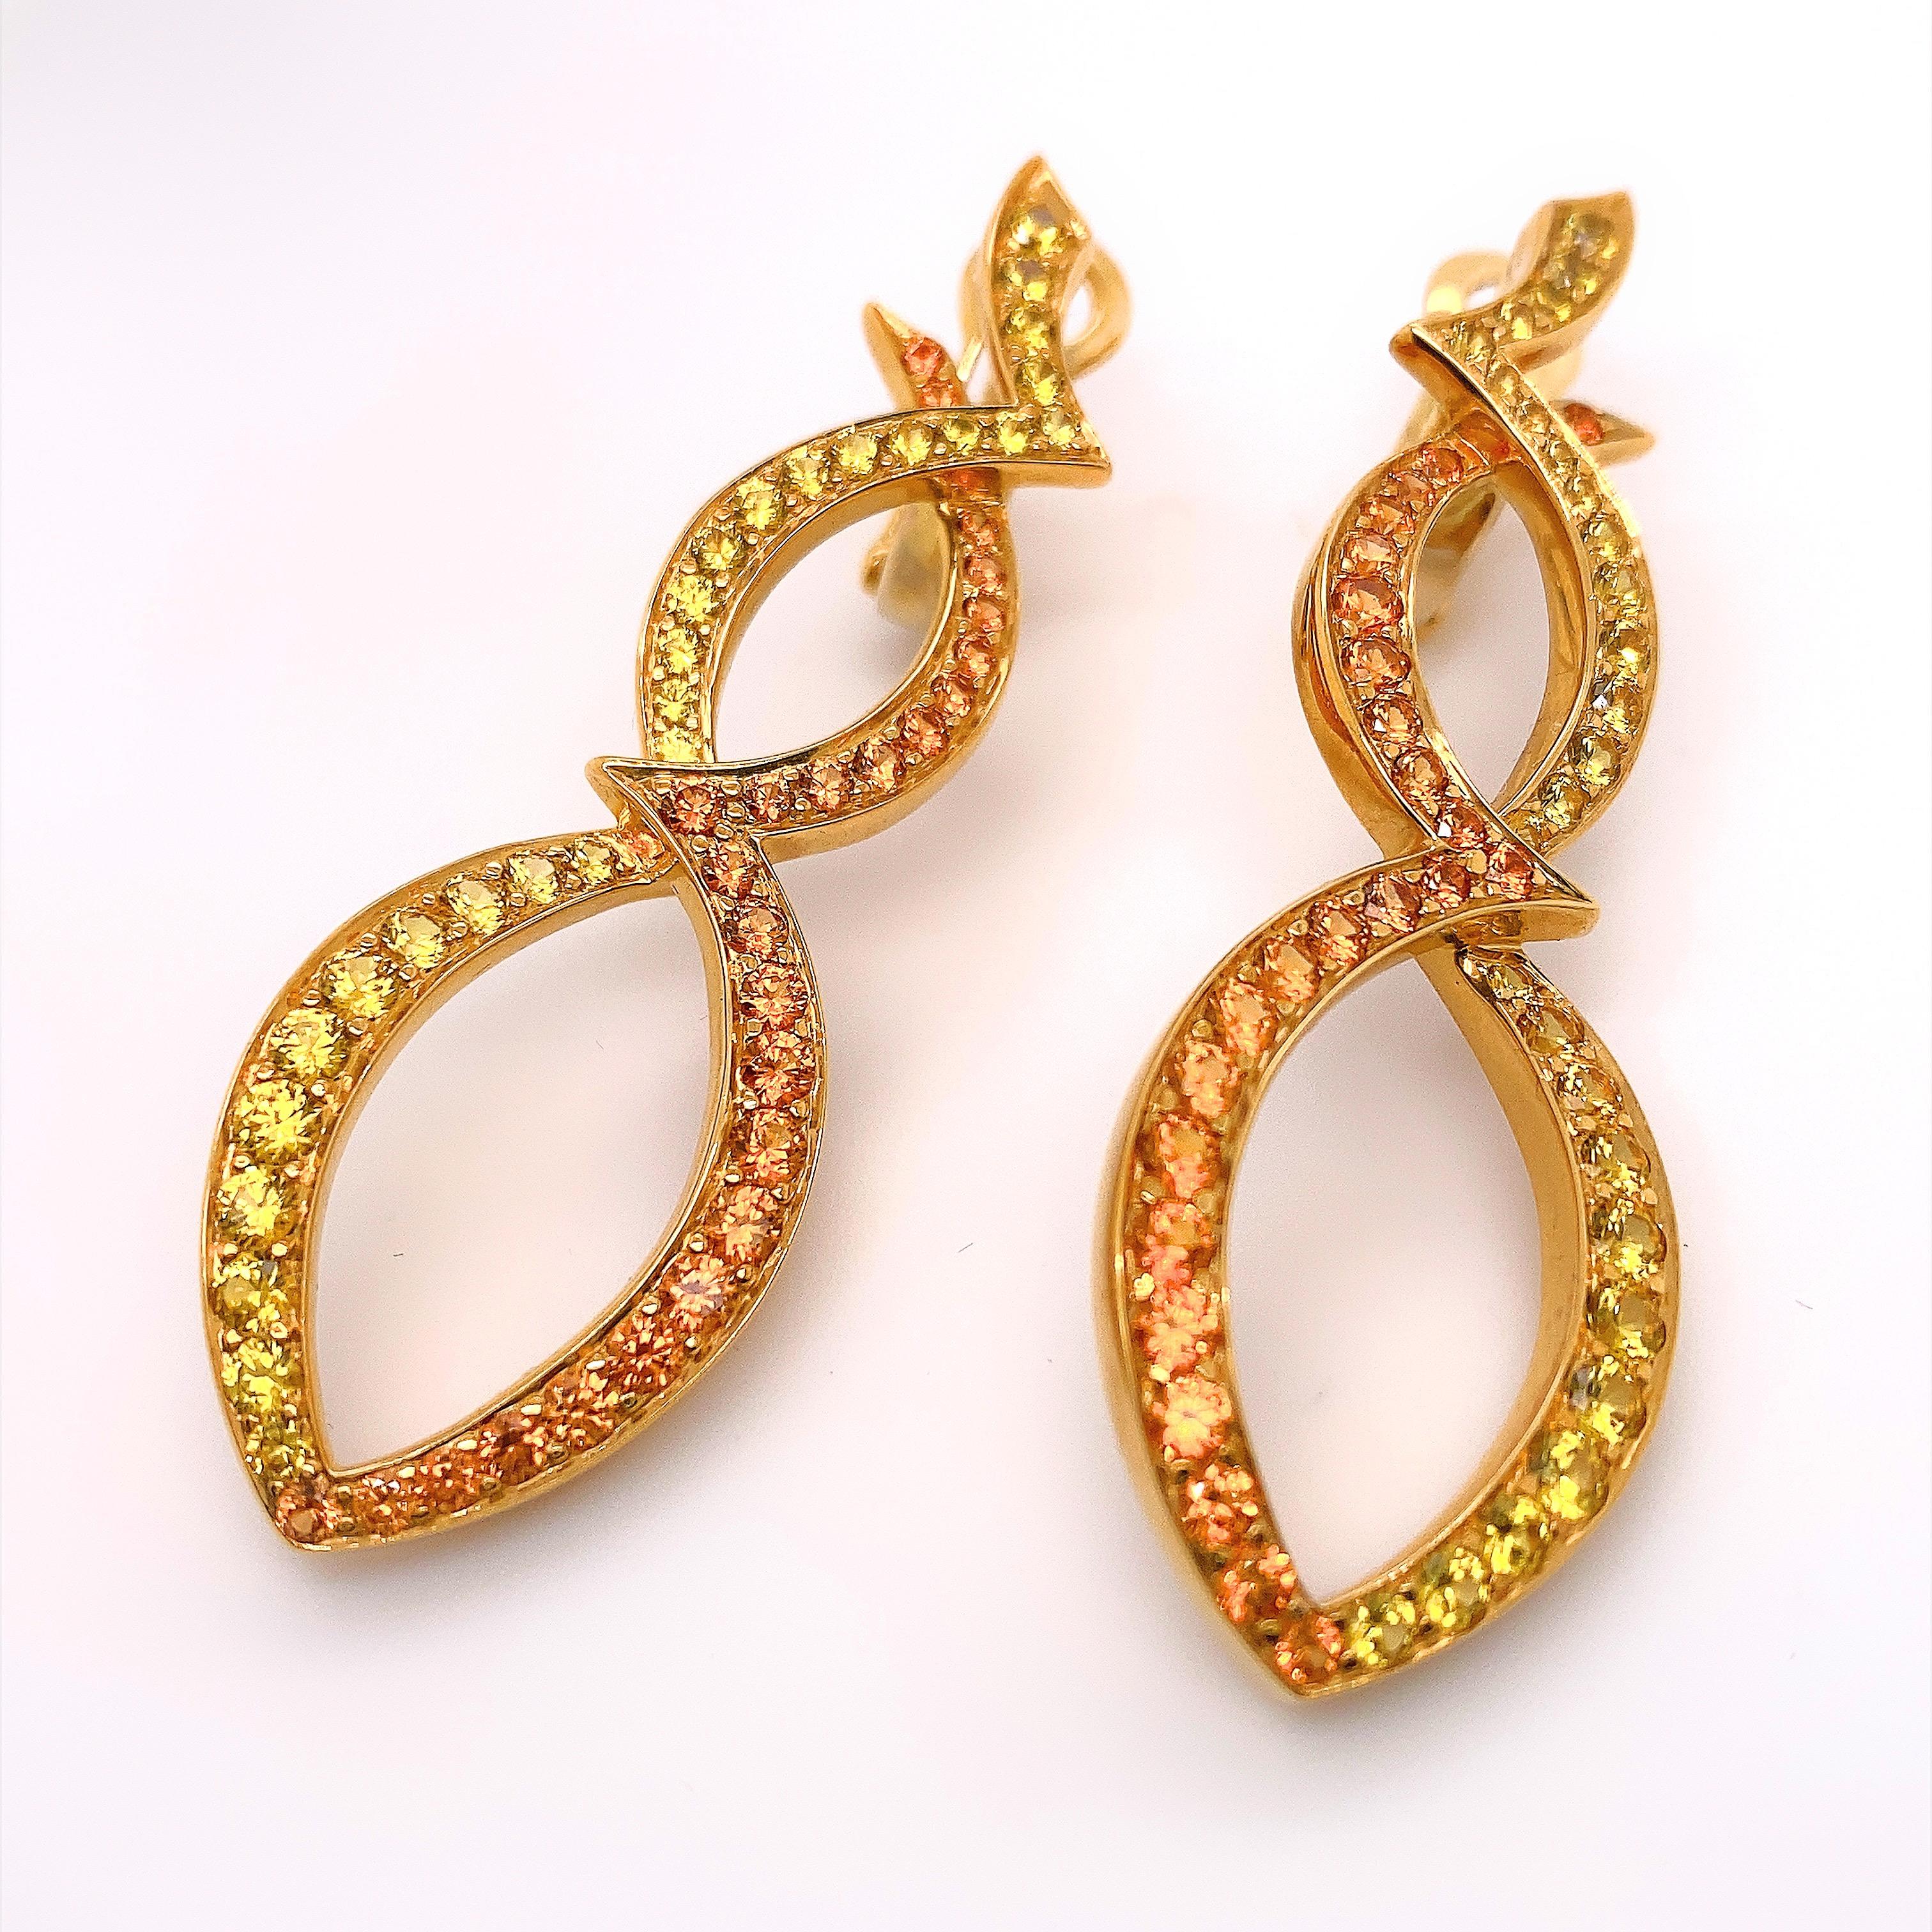 RODNEY RAYNER Earrings
Round Cut Orange Sapphires & Green Tsavorites
Style:  Clip on with Post for Pierced Ears
Metal:  18kt Yellow Gold
Size / Measurements:  2' Inches Length - 1/5 inch Wide
Hallmark:  750 RAYNER
Includes:  Elegant Earring